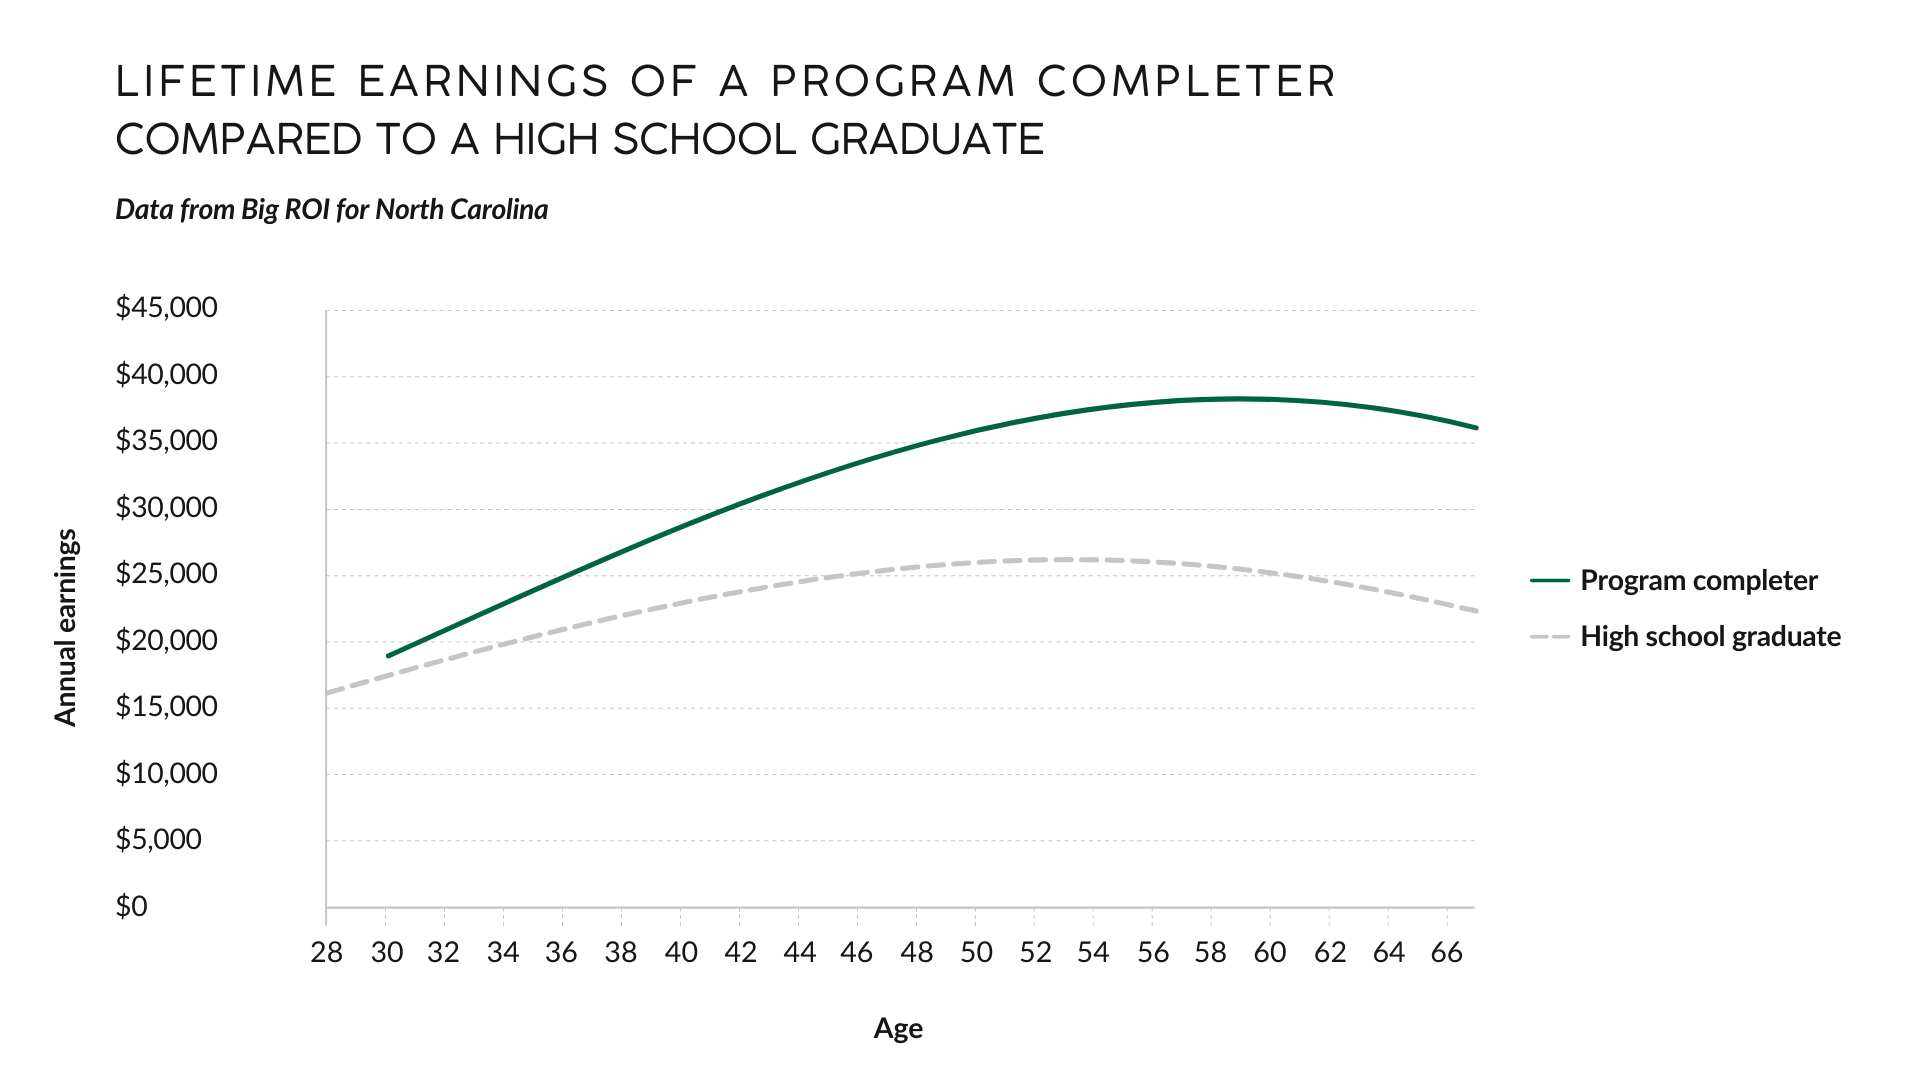 Lifetime earnings of a program completer compared to a high school graduate: Completer just over $35,000; high school graduate just over $20,000